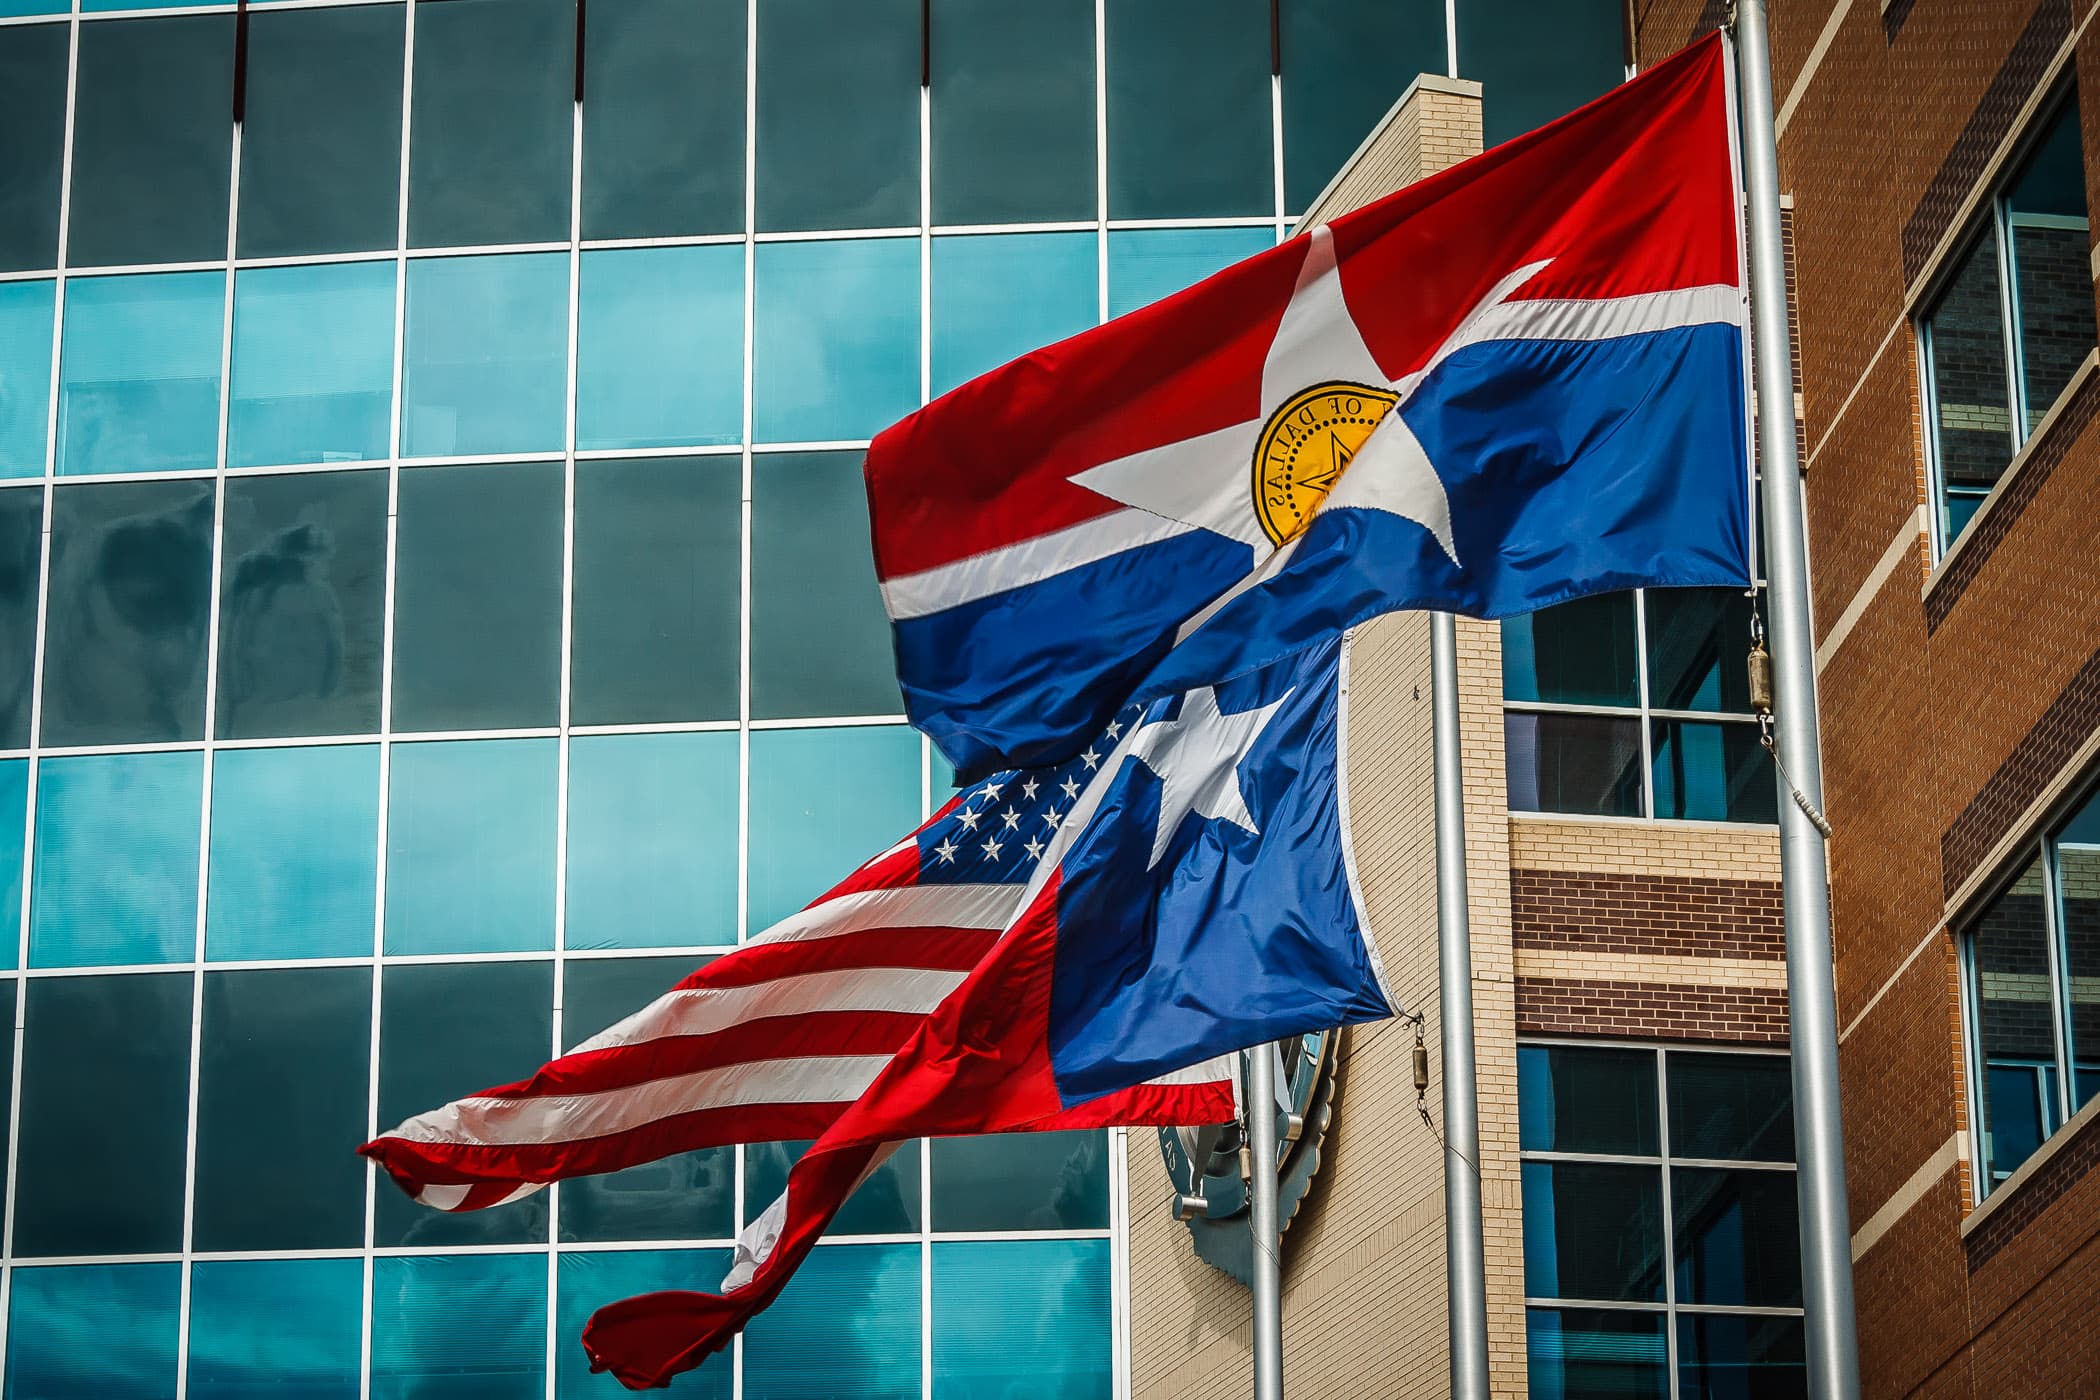 The flags of the City of Dallas, Texas and the United States wave in the wind outside of the Dallas Police Department Headquarters in The Cedars.